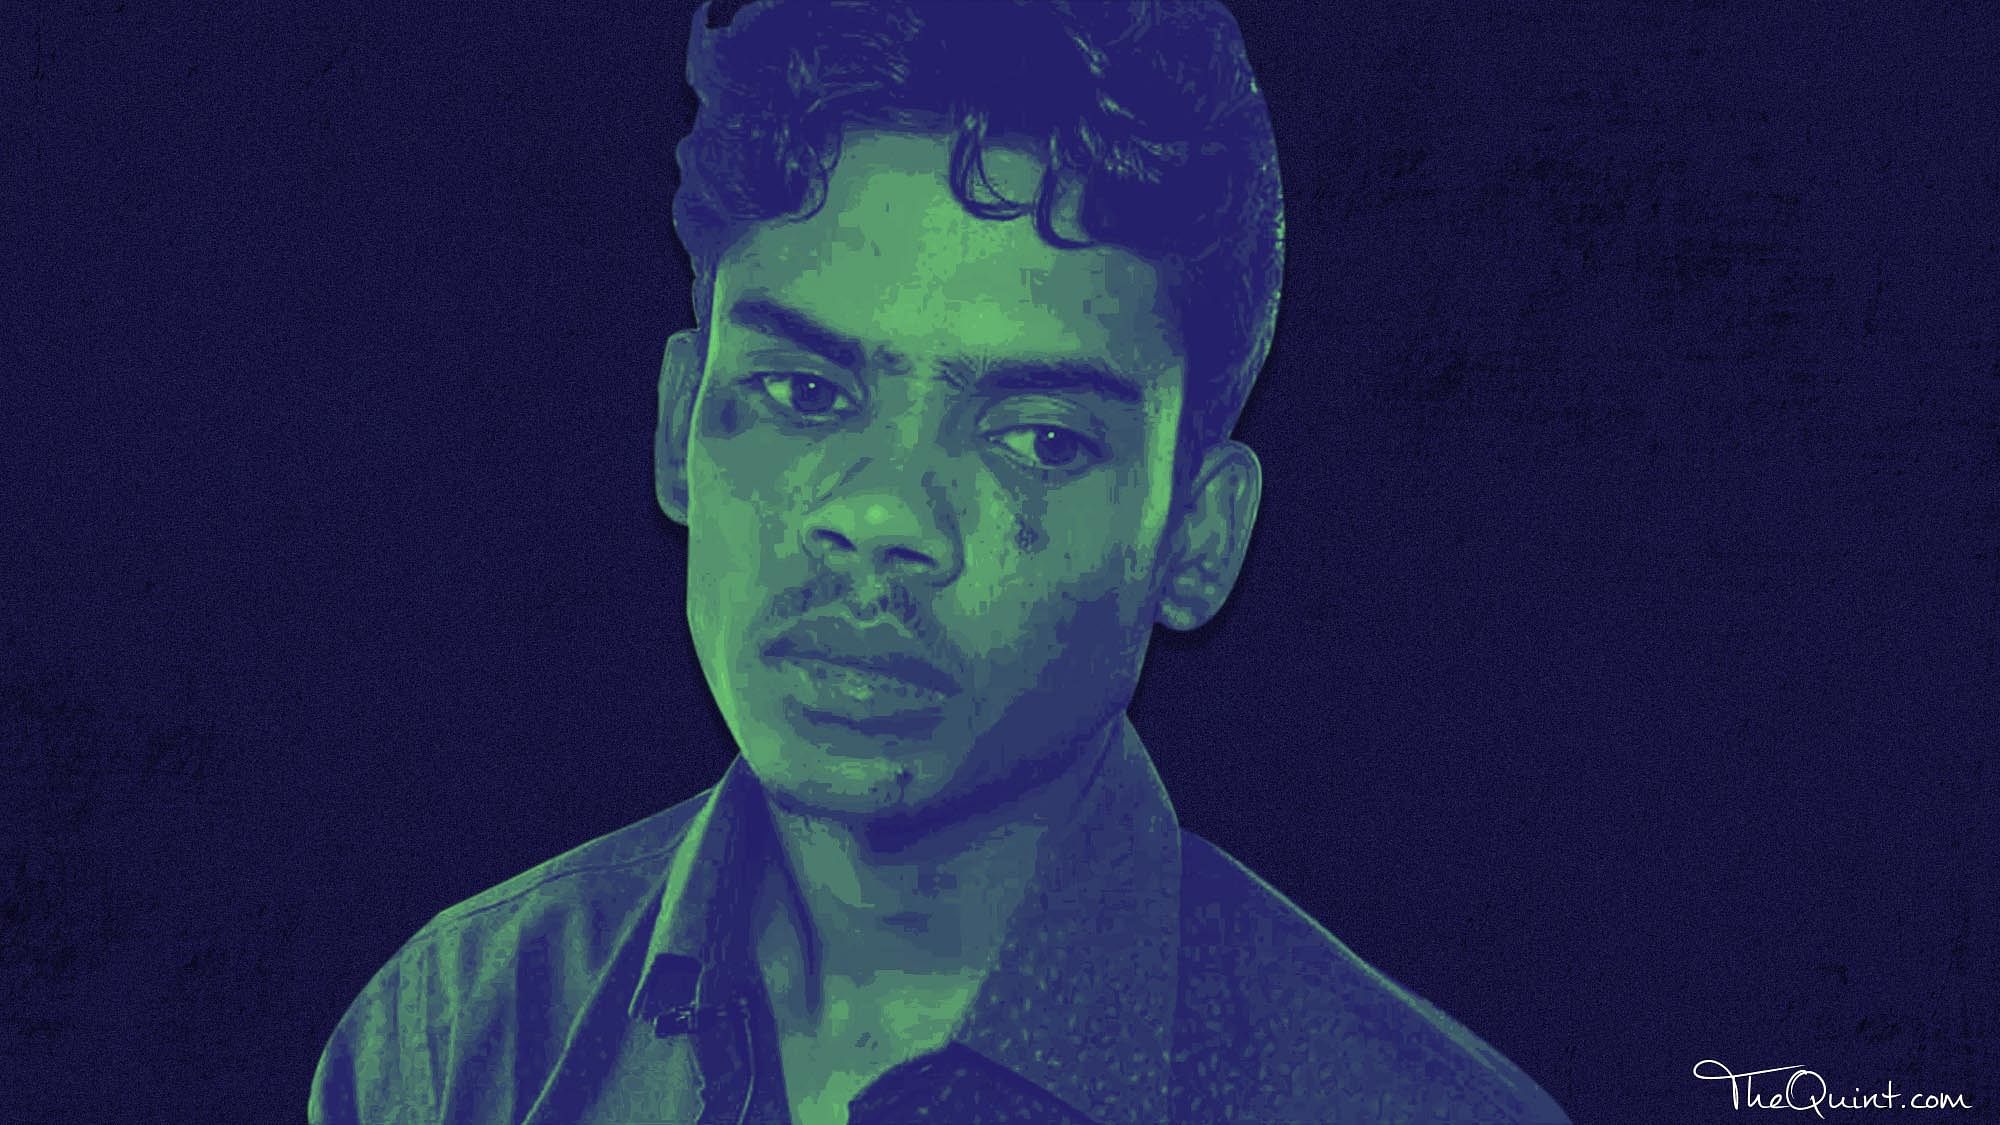 Sakir Khan was injured in the Ballabhgarh train lynching incident that claimed the life of his younger brother Junaid on 22 June. (Photo: <b>The Quint</b>)